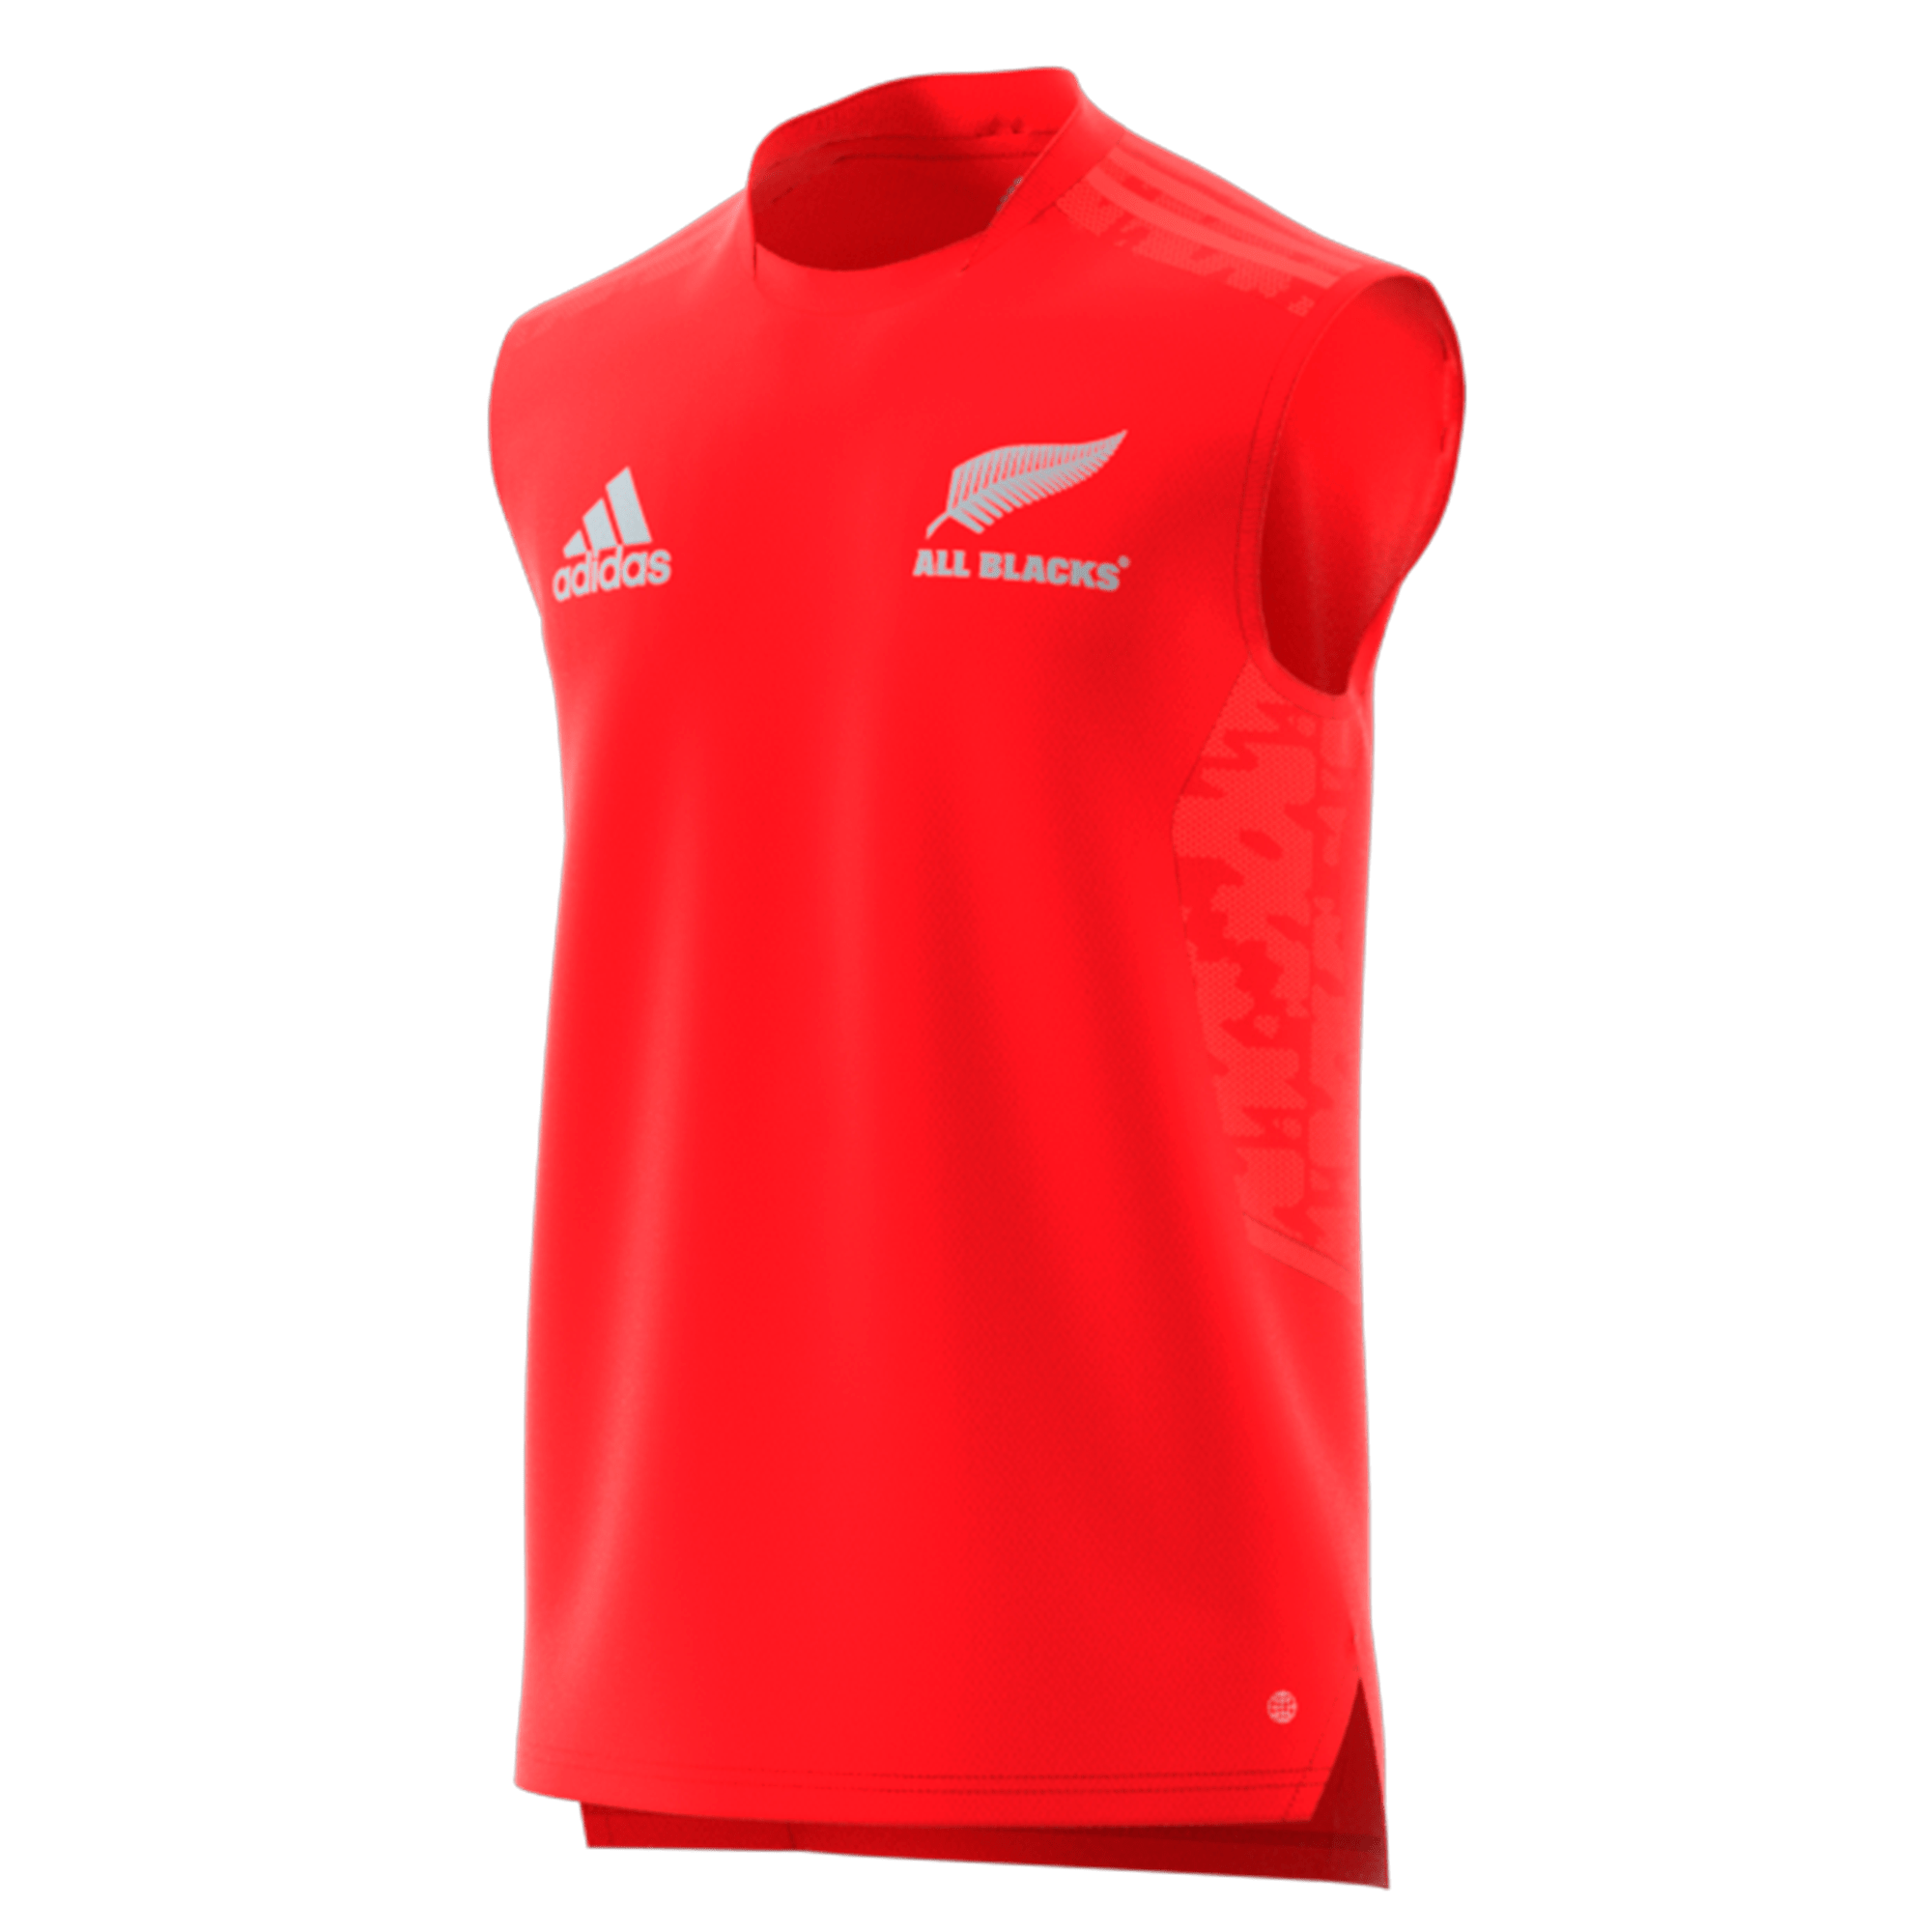 All Blacks Training Jersey 22/23 by adidas  Official New Zealand Rugby  Gear - World Rugby Shop